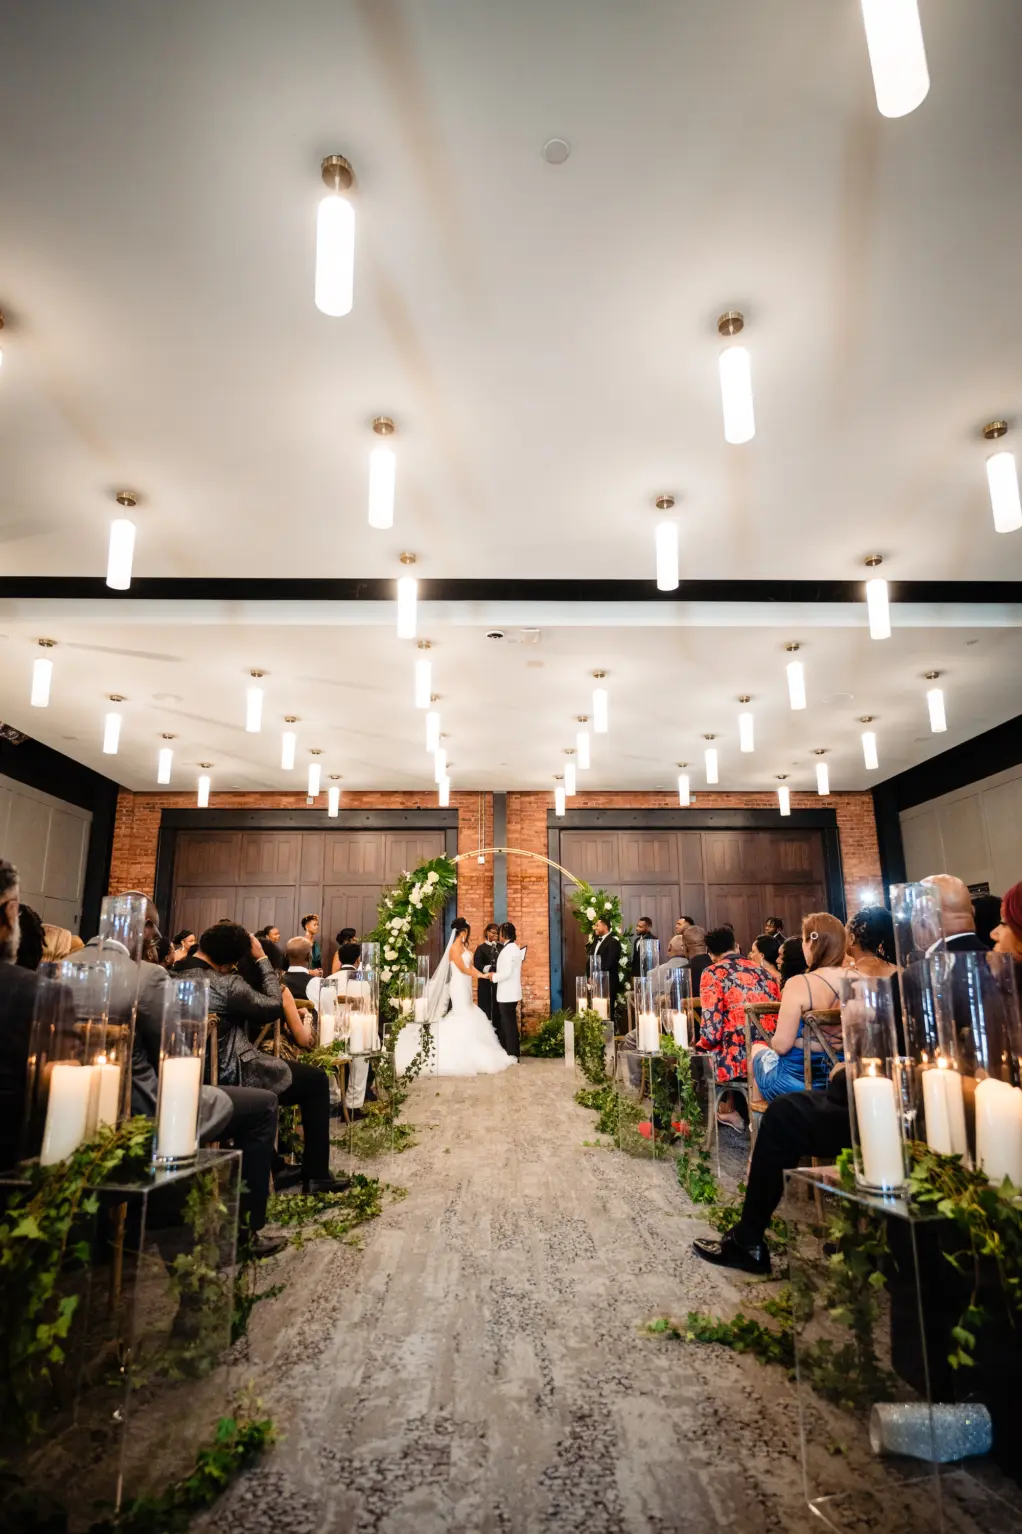 Elegant Indoor Industrial Wedding Ceremony with Pillar Candle Aisle Decor Inspiration | Round Gold Arch Ideas | Tampa Heights Event Venue Armature Works